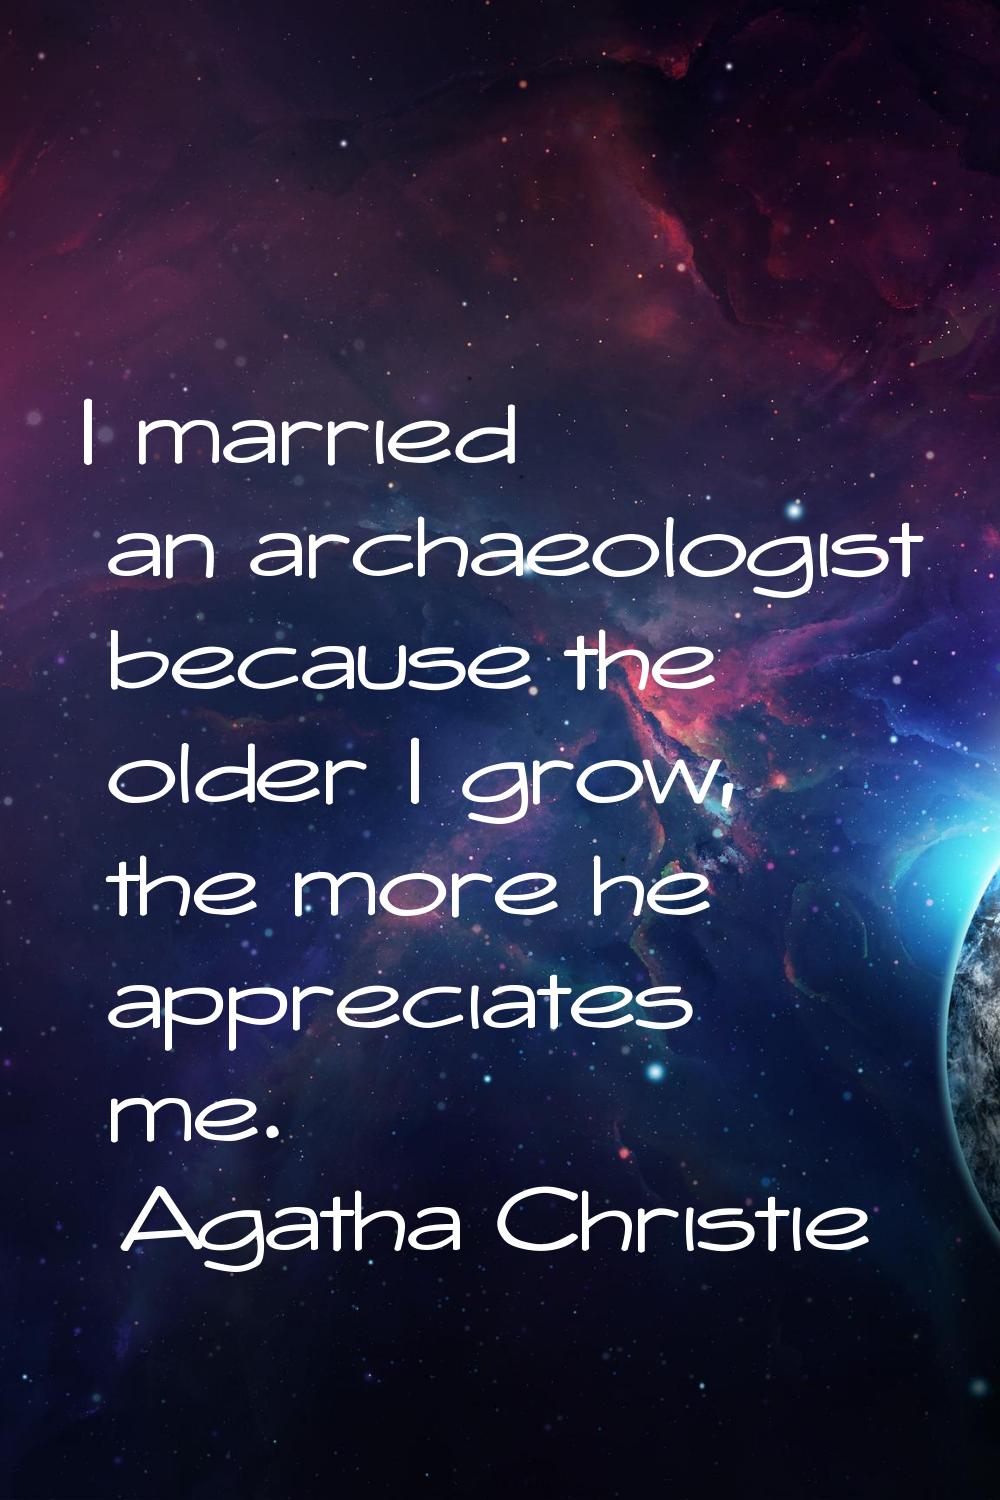 I married an archaeologist because the older I grow, the more he appreciates me.